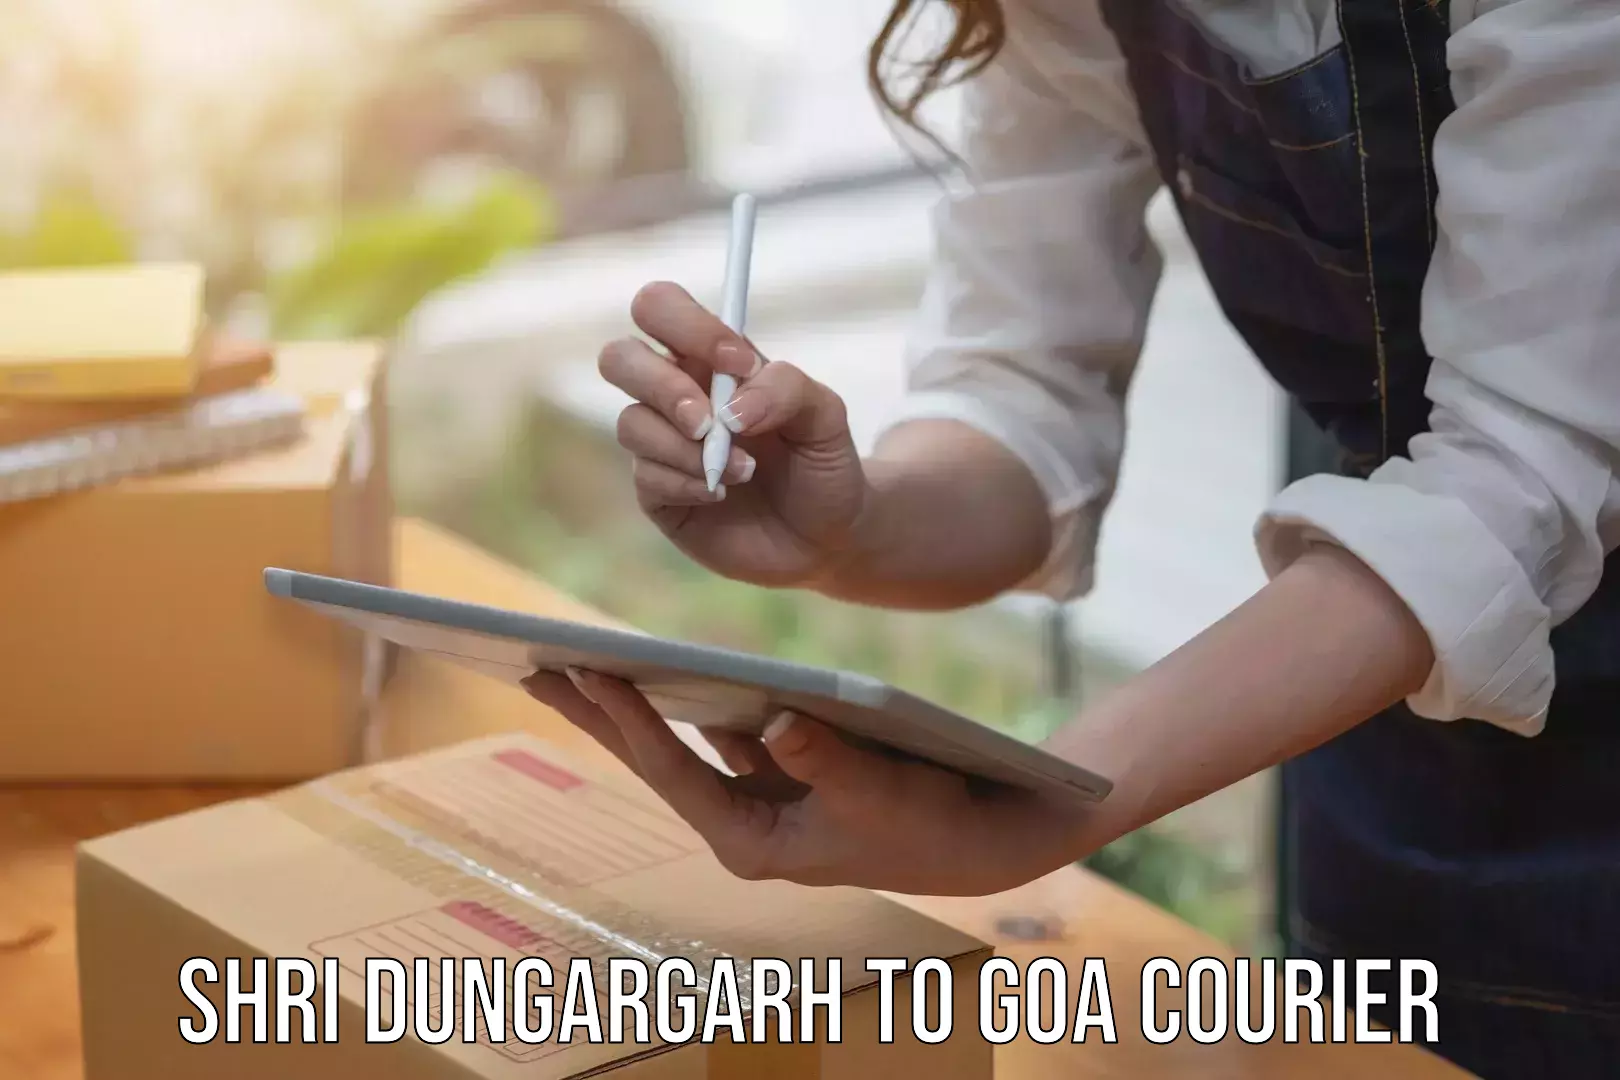 On-call courier service Shri Dungargarh to Bardez